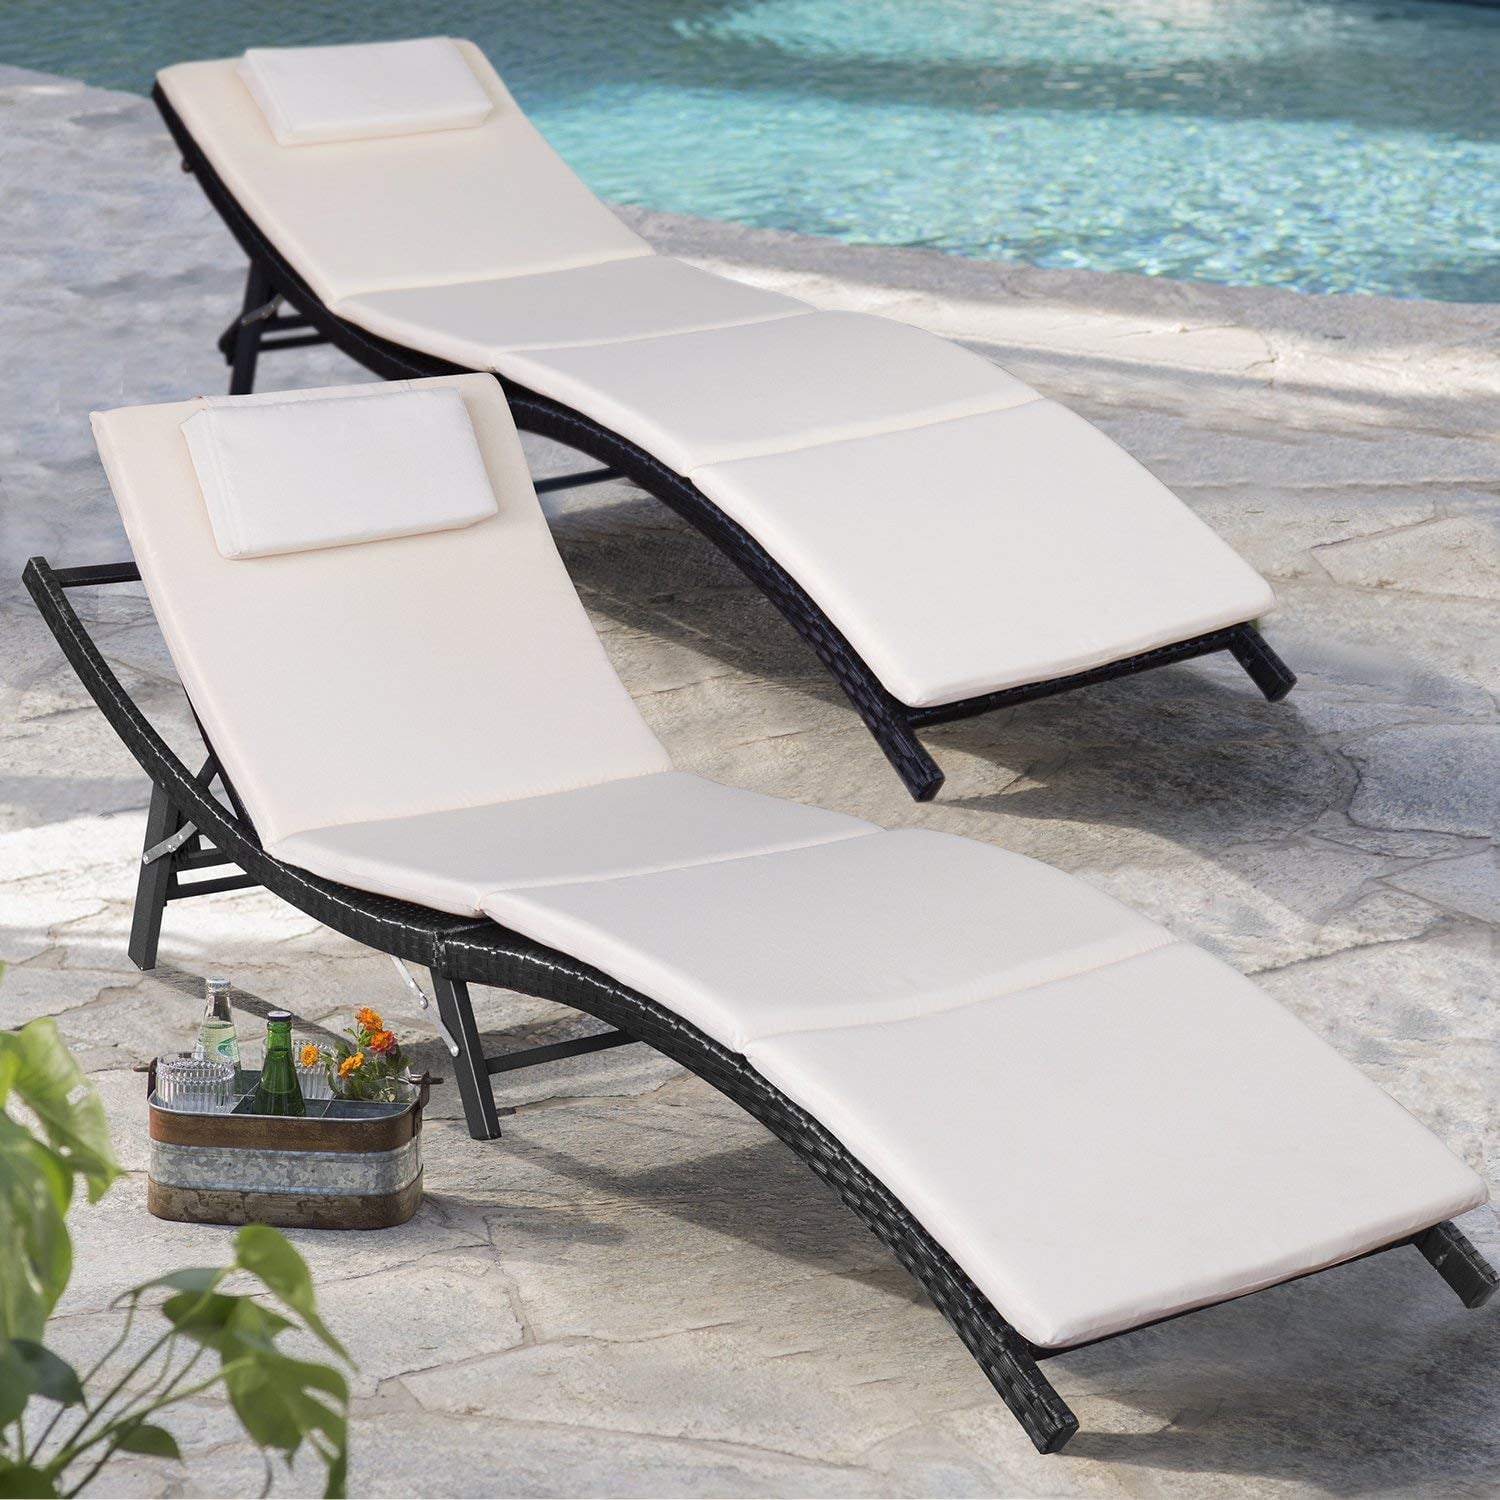 Backyard Poolside Chairs for All Weather Safstar Patio Chaise Lounge Set Outdoor 3-Piece Furniture 